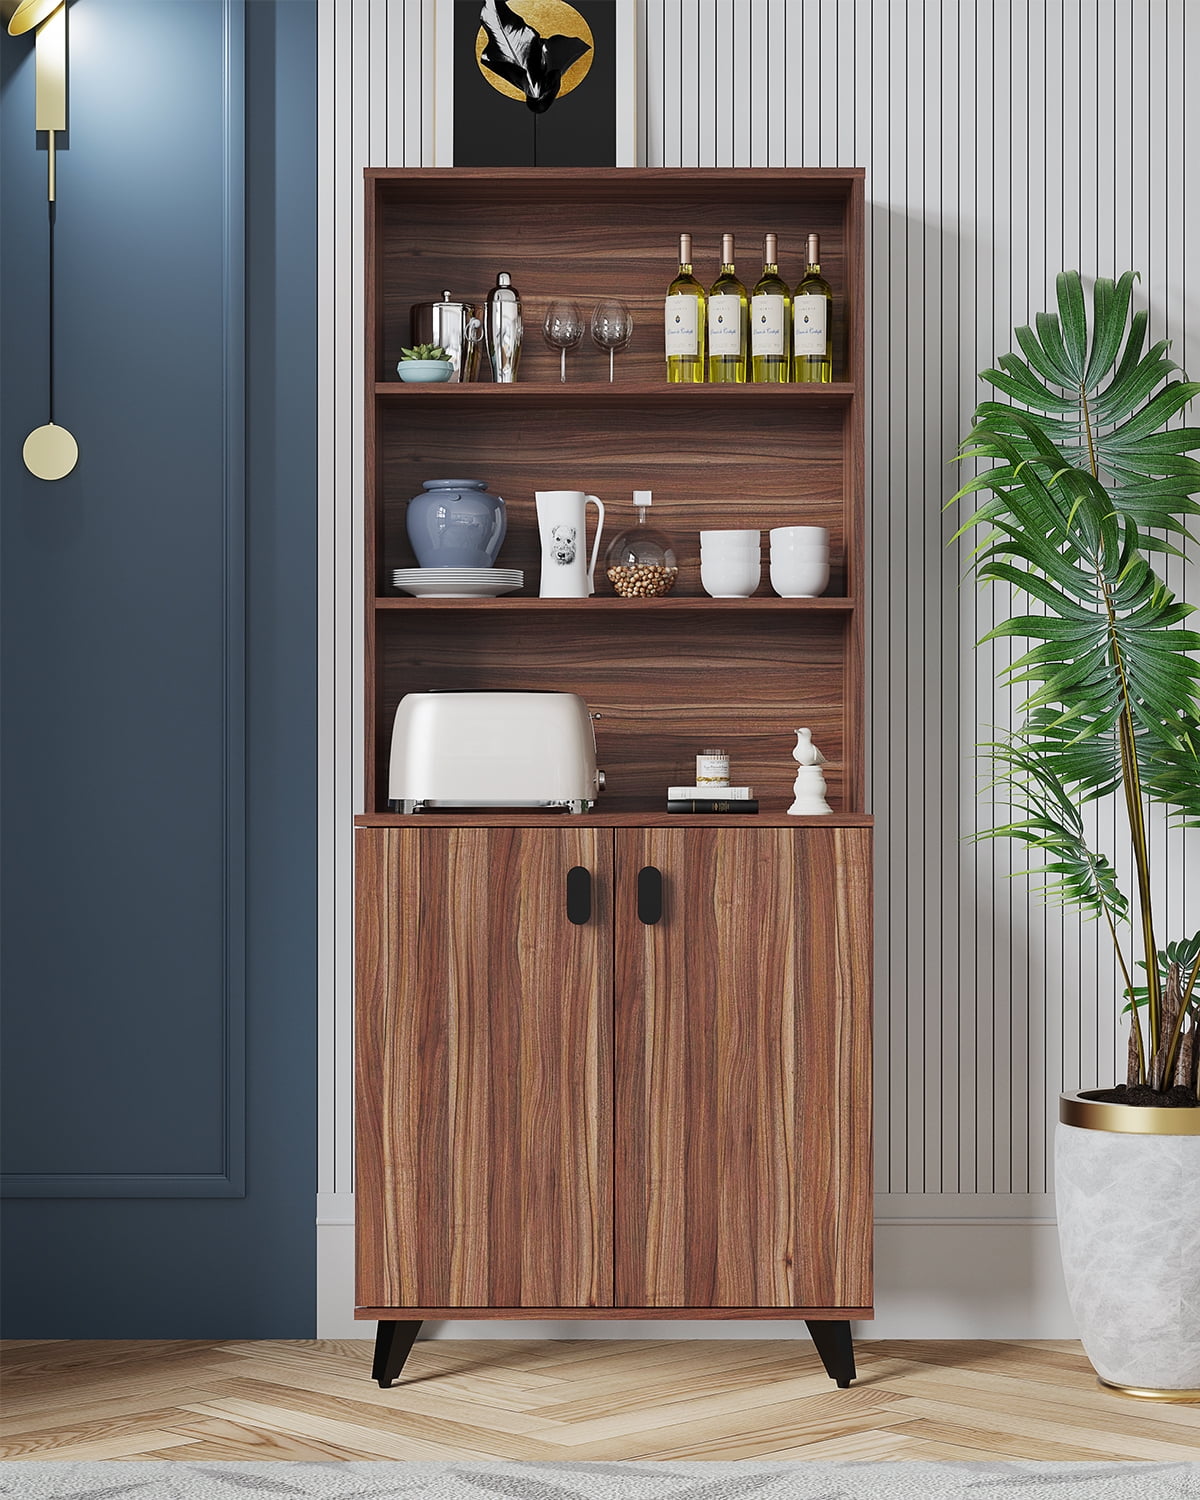 COPIAE Kitchen Pantry Storage Cabinet, with 2 Doors and Shelves ...